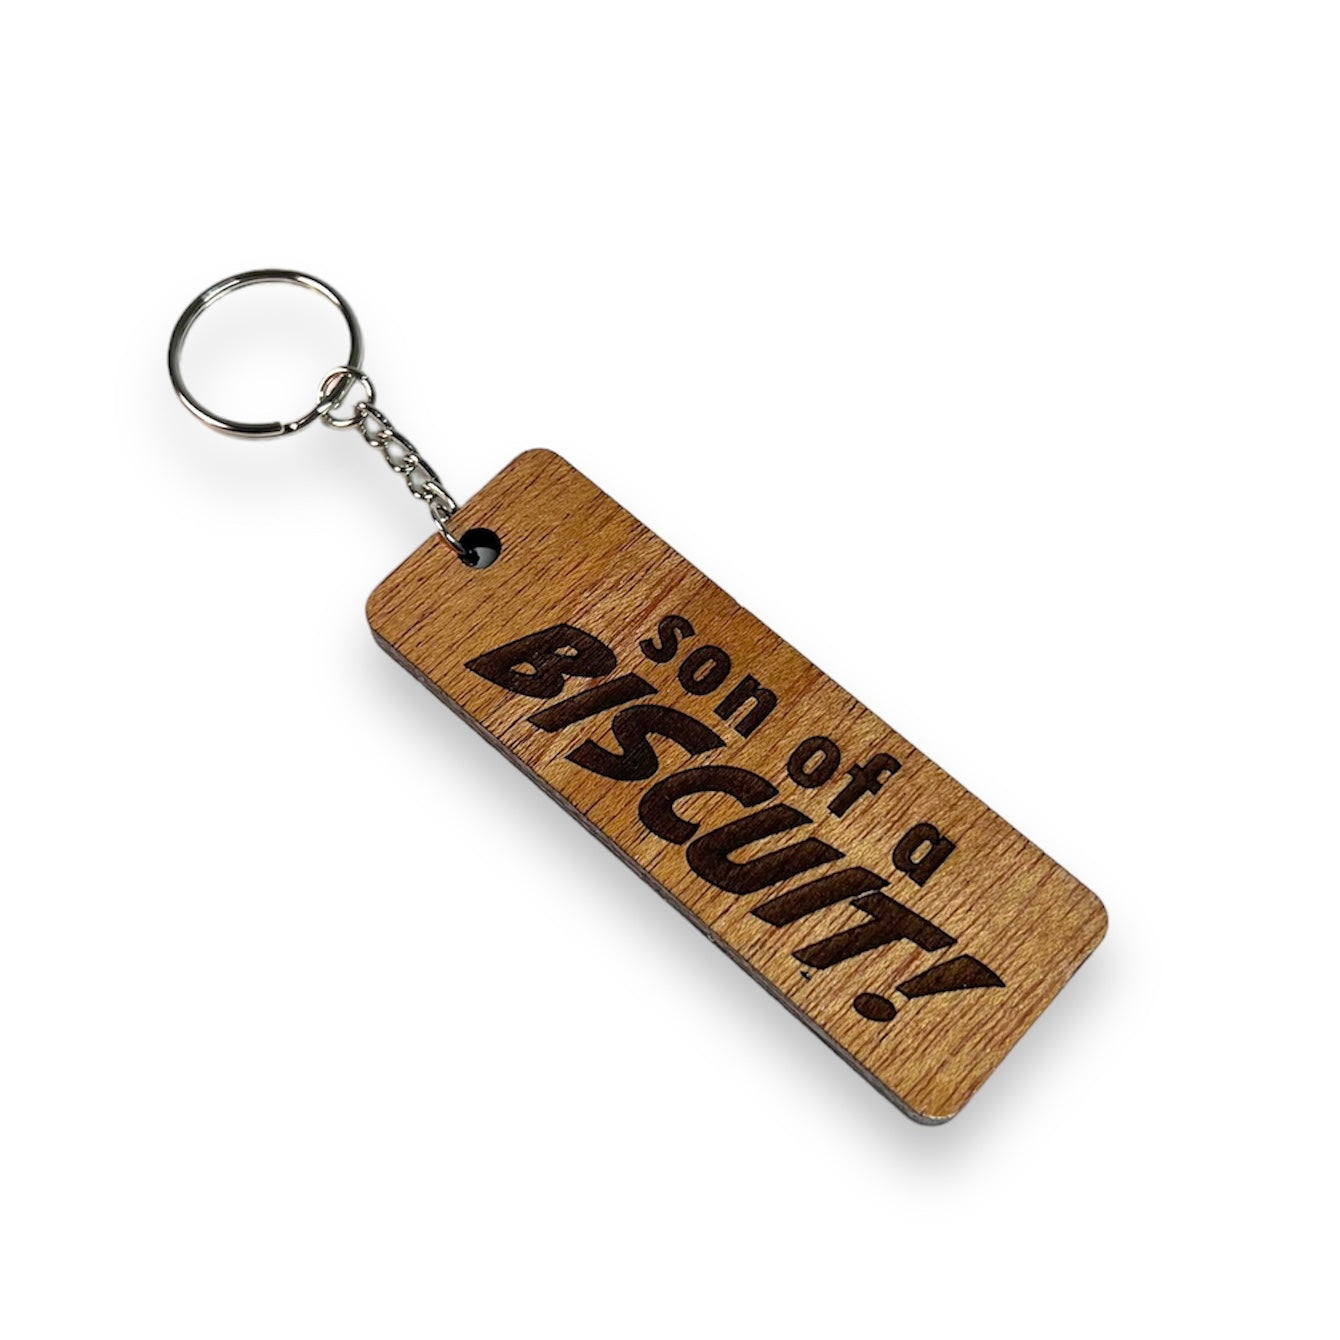 “Son of a Biscuit!” Keychain